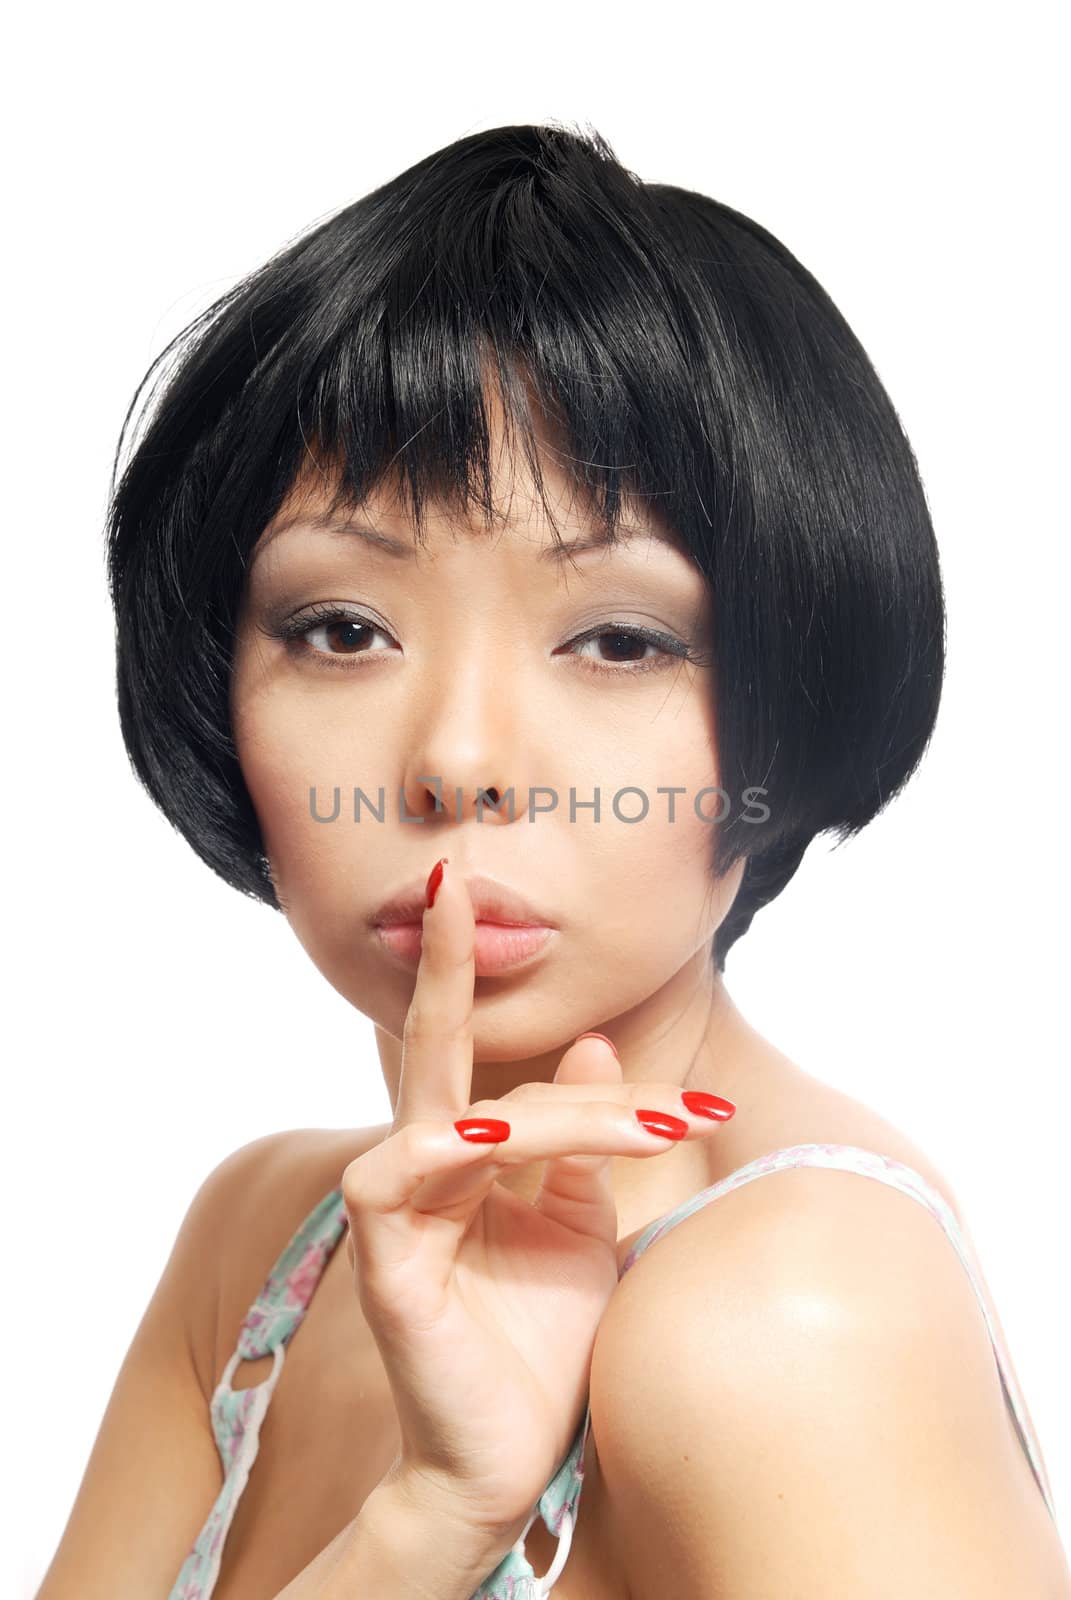 Sensual portrait of the model with finger on her lips